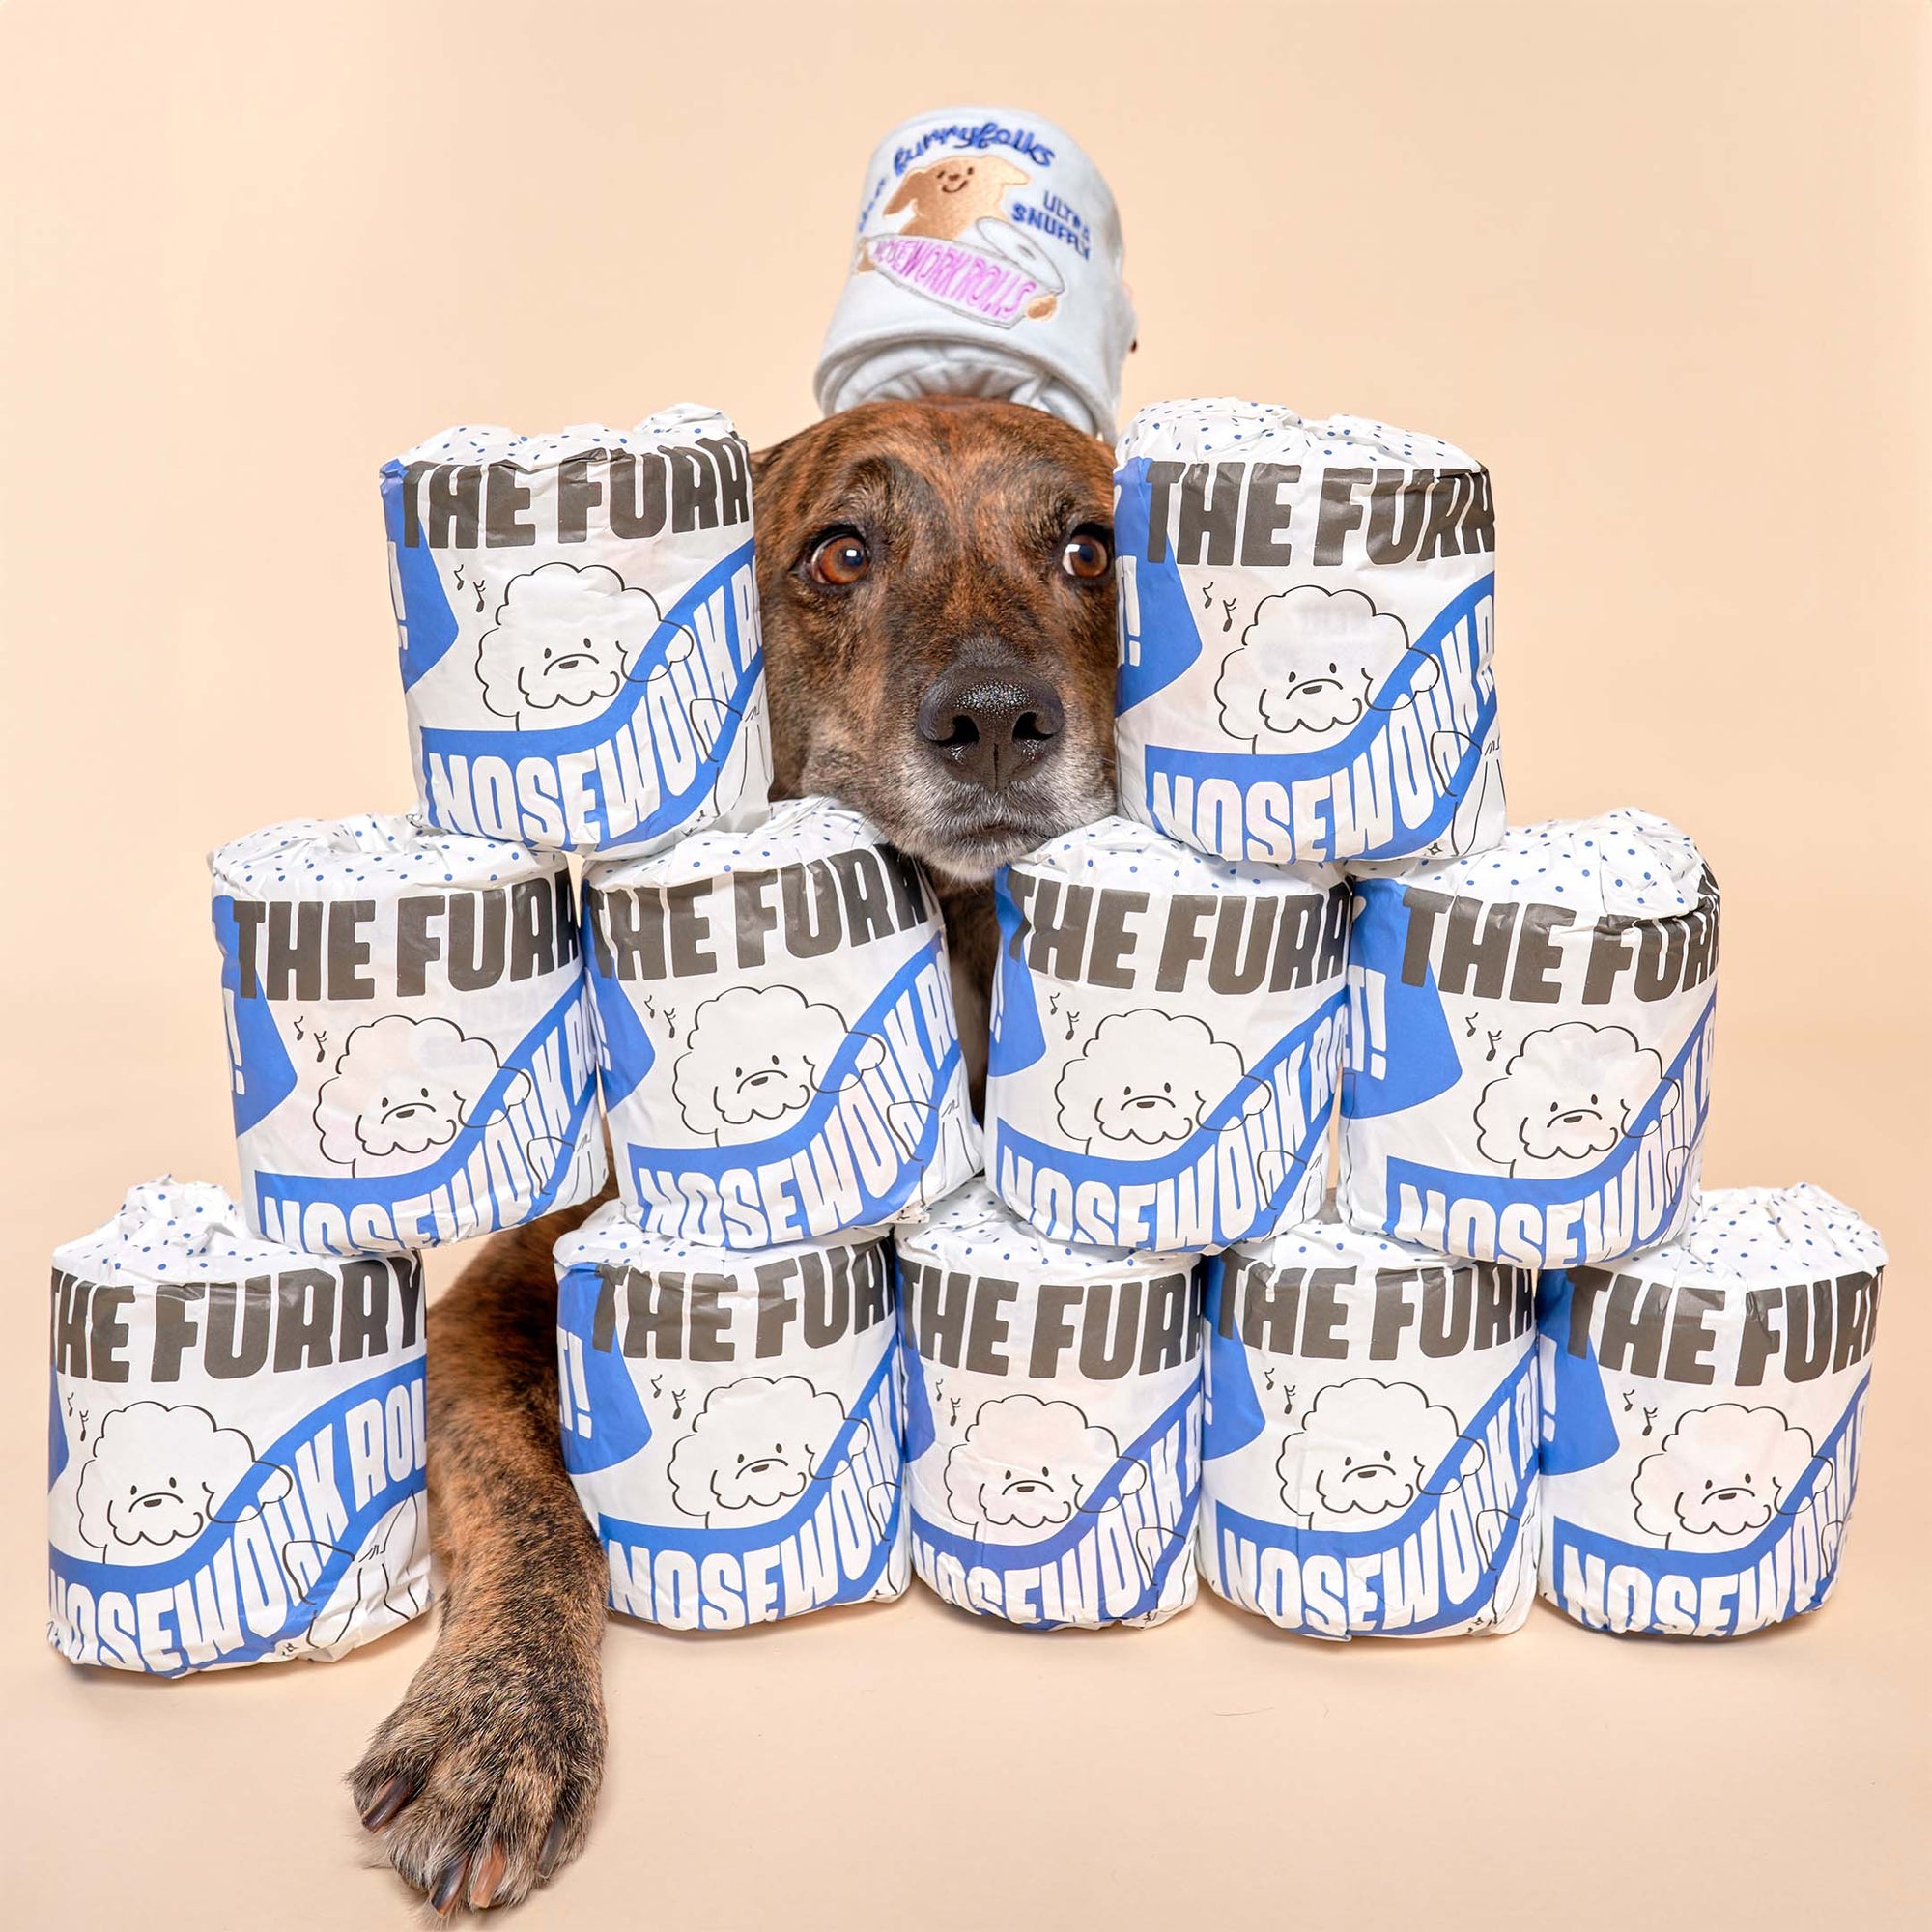 The photograph features a brindle dog peeking through a stack of rolled-up fabric toys, each branded with "THE FURRYFOLKS NOSEWORK ROLLS" and adorned with an illustration of a fluffy dog. The toy rolls are arranged in a pyramid-like structure with the dog's head humorously positioned at the top, wearing one of the rolls like a hat. This playful setup highlights the product's design and the dog's curious nature. The warm beige background complements the colors of the dog and the products.